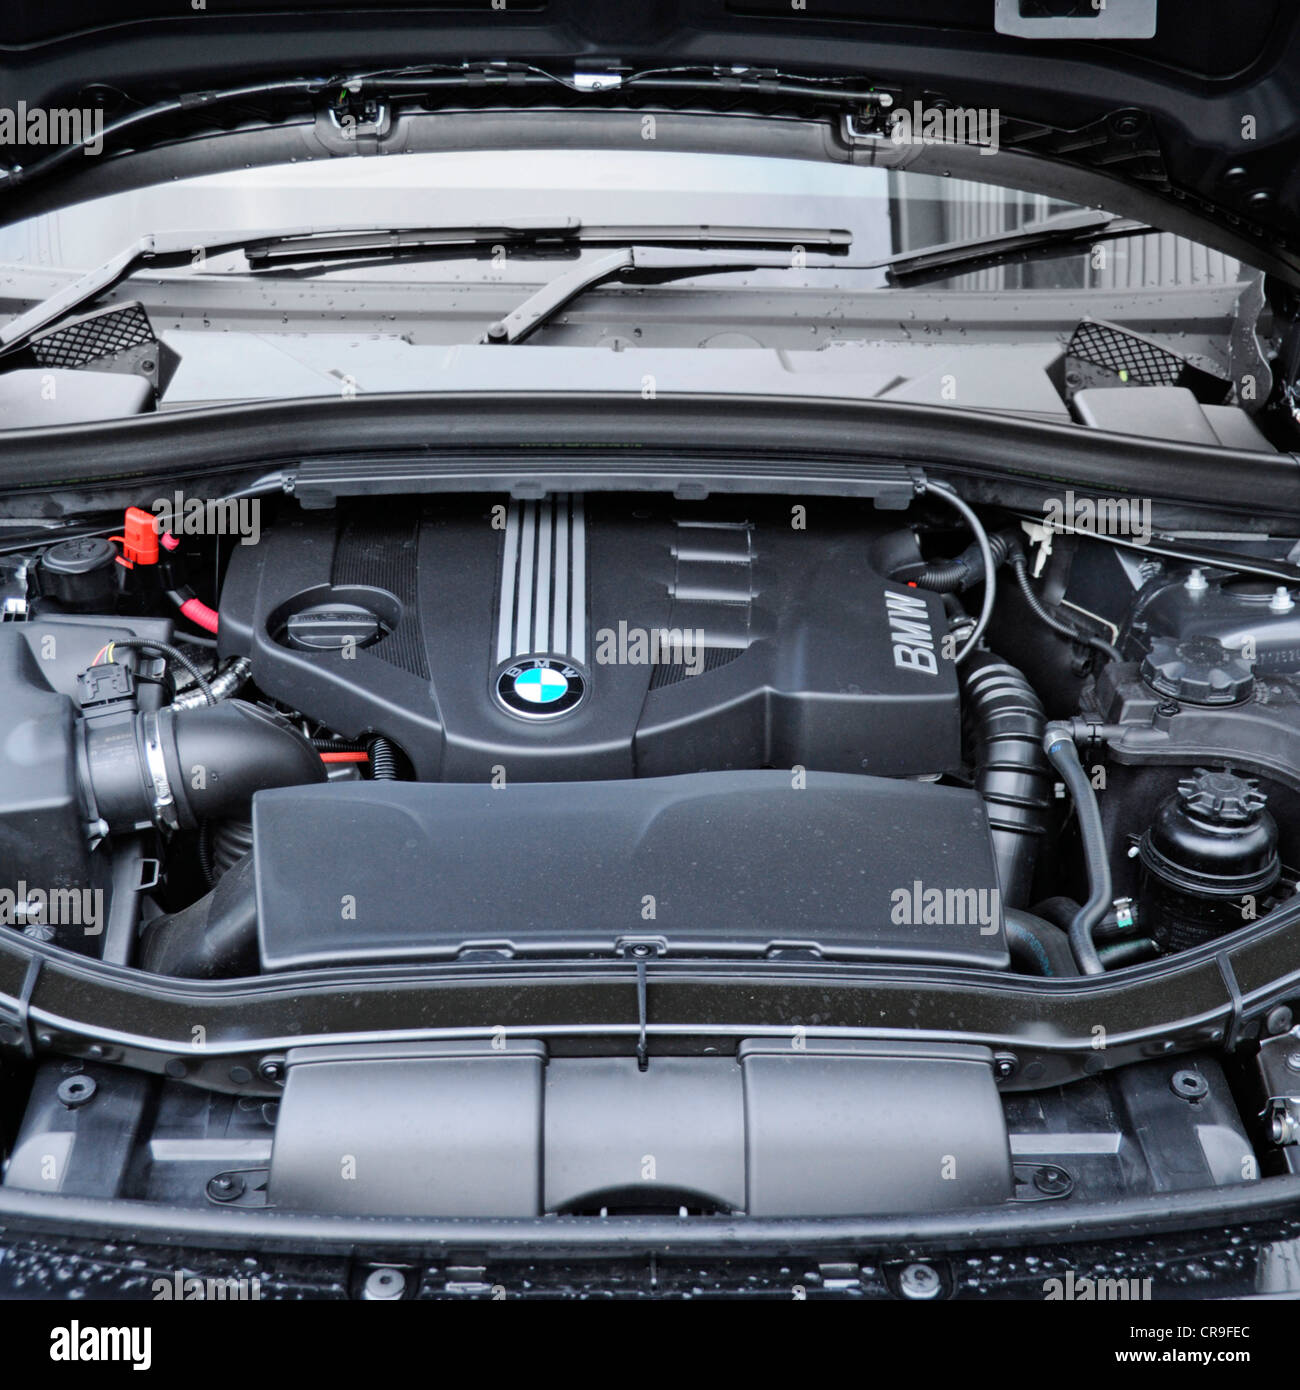 Engine compartment & components under the bonnet of a BMW X1 Sdrive 18d diesel car England UK Stock Photo